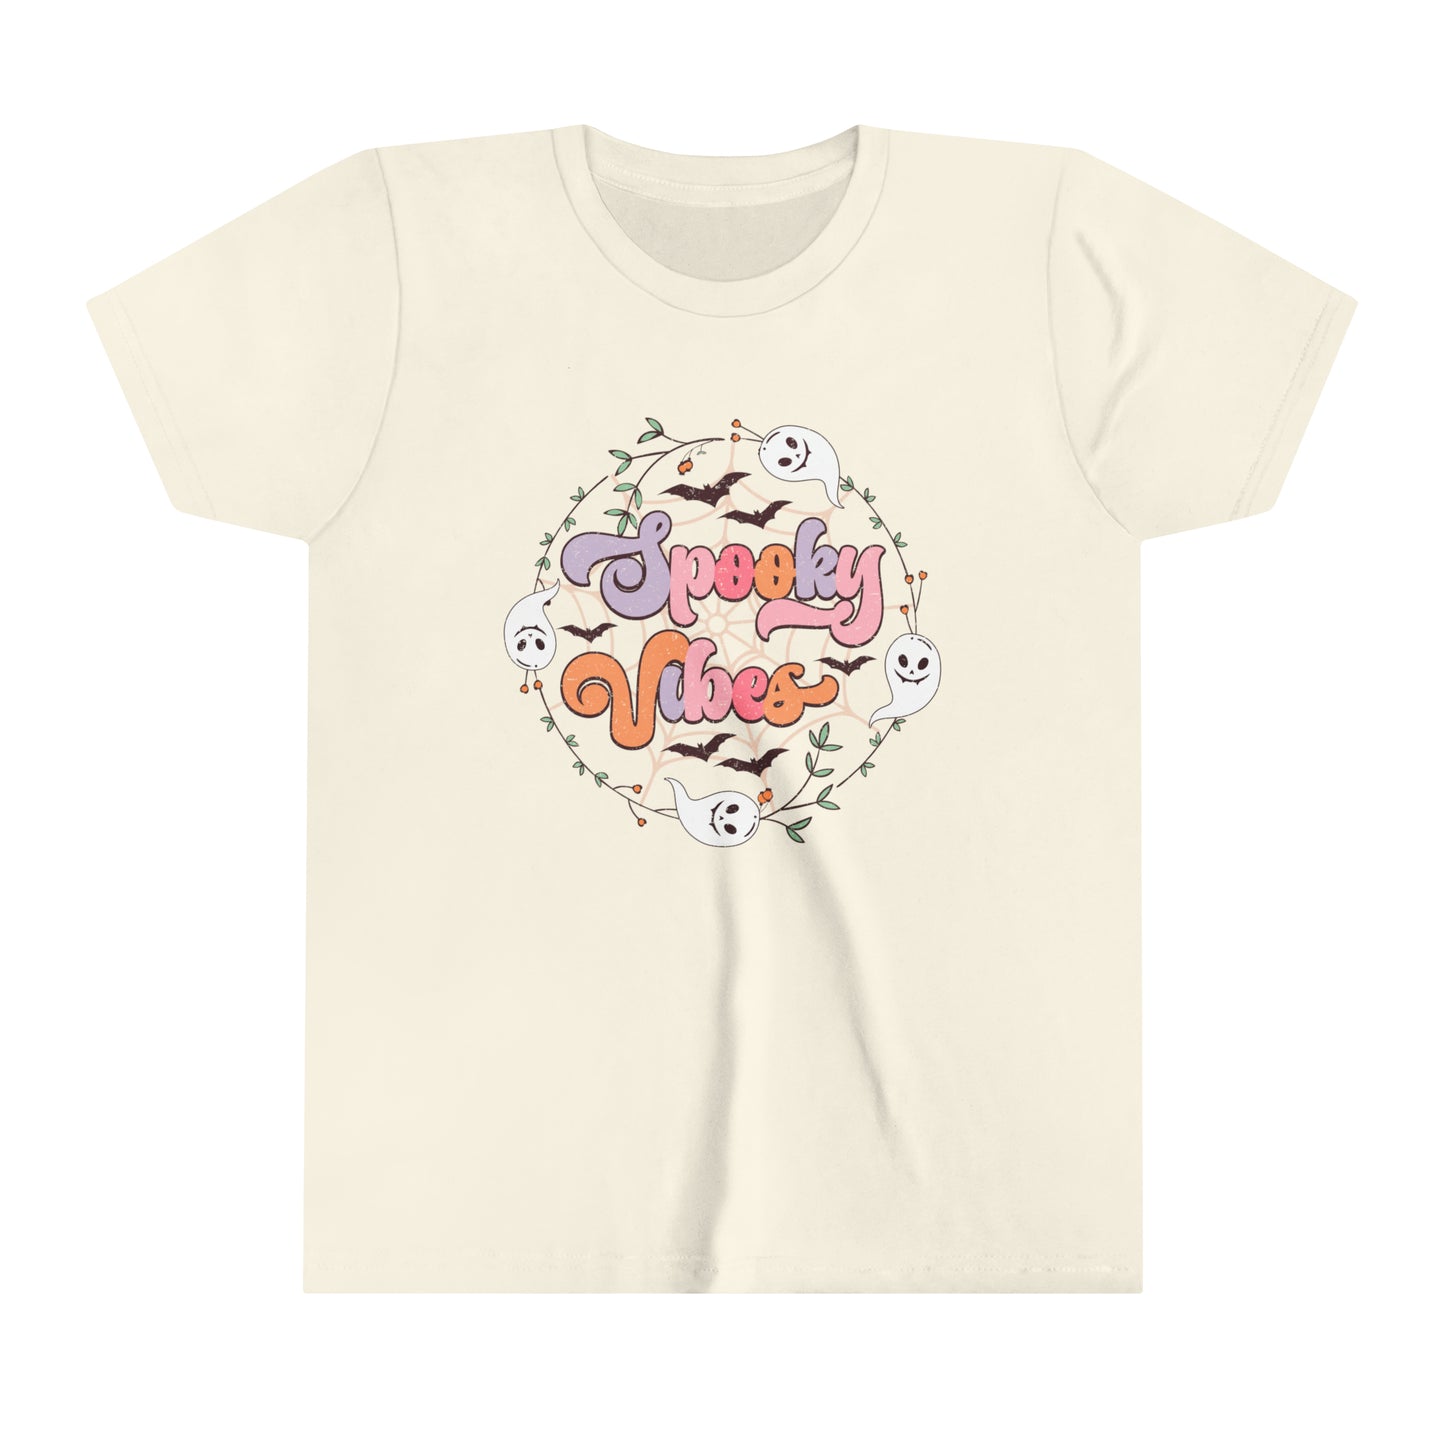 Spooky Vibes Circle Girl's Youth Short Sleeve Tee